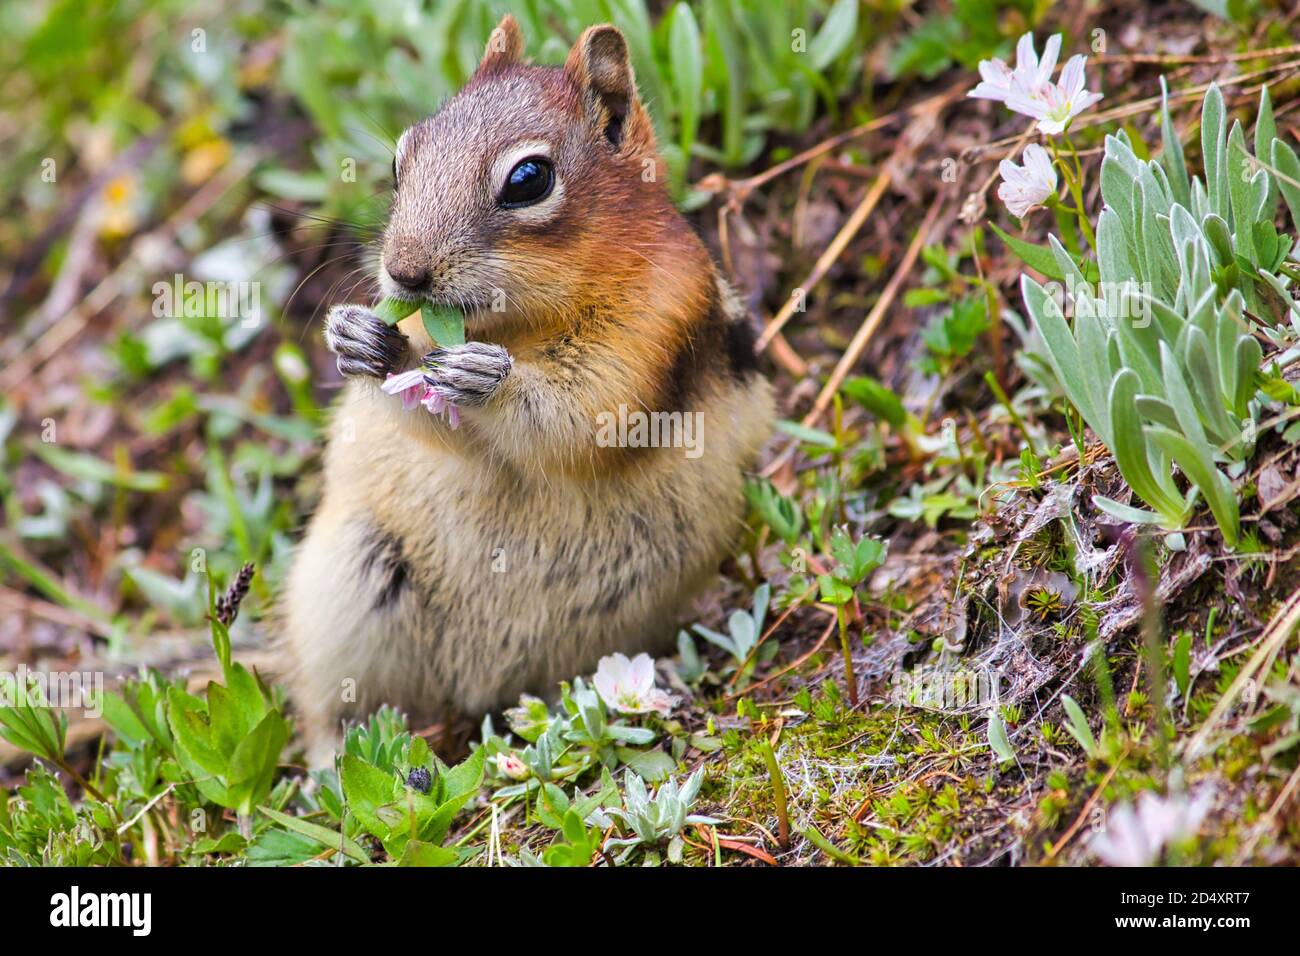 Cute squirrel feeding flower while sitting on the grass, British Columbia, Canada Stock Photo